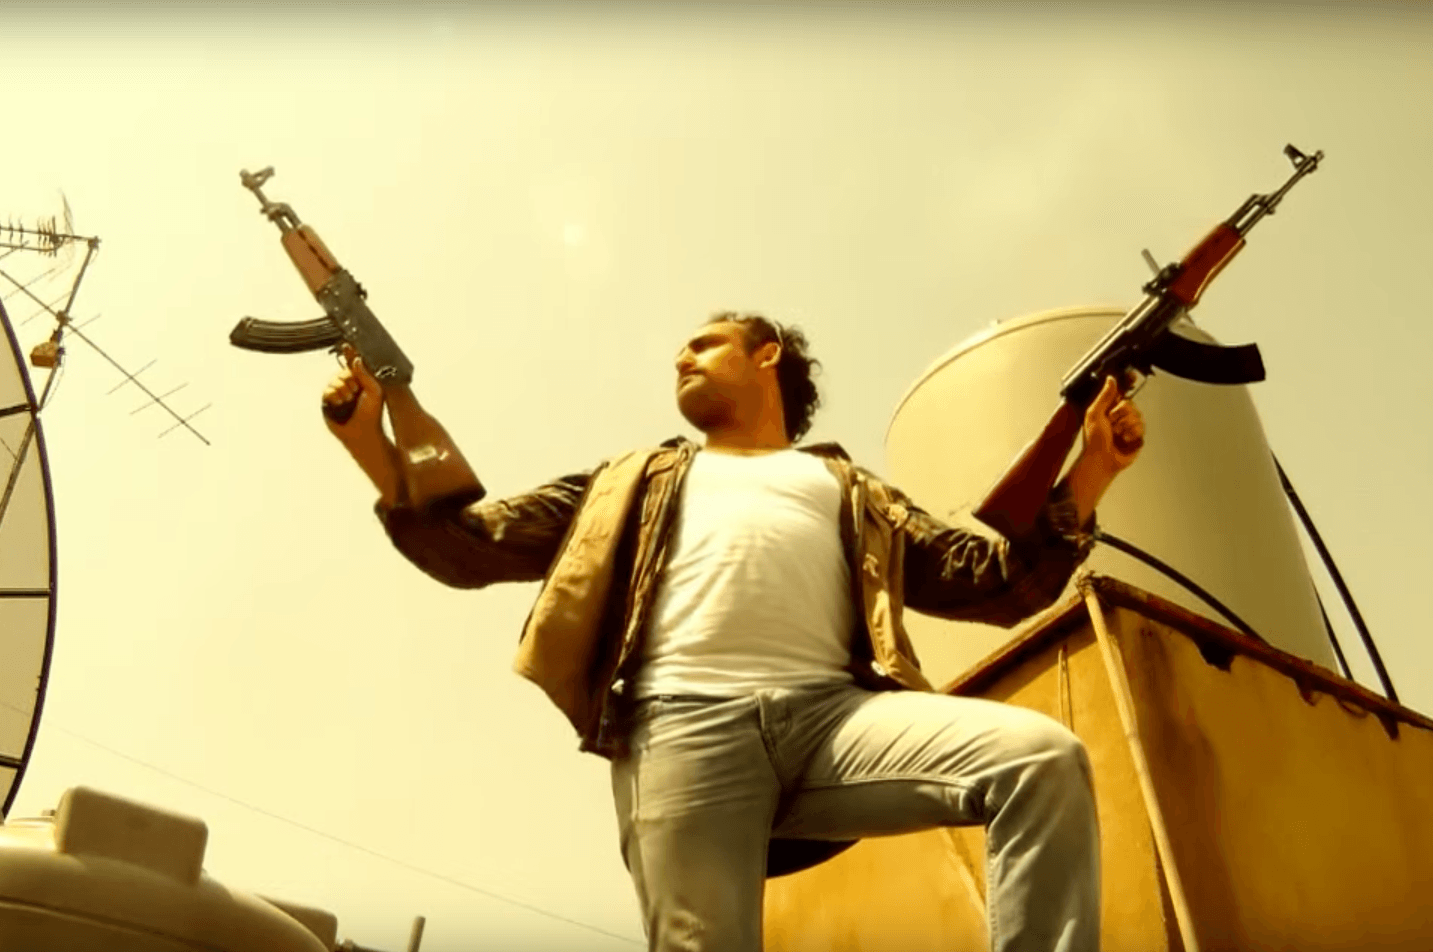 An actor fires guns from a rooftop in Beirut in a short satirical video made by Cheyef 7alak, a Lebanese advocacy group, to highlight the dangers of celebratory gunfire.